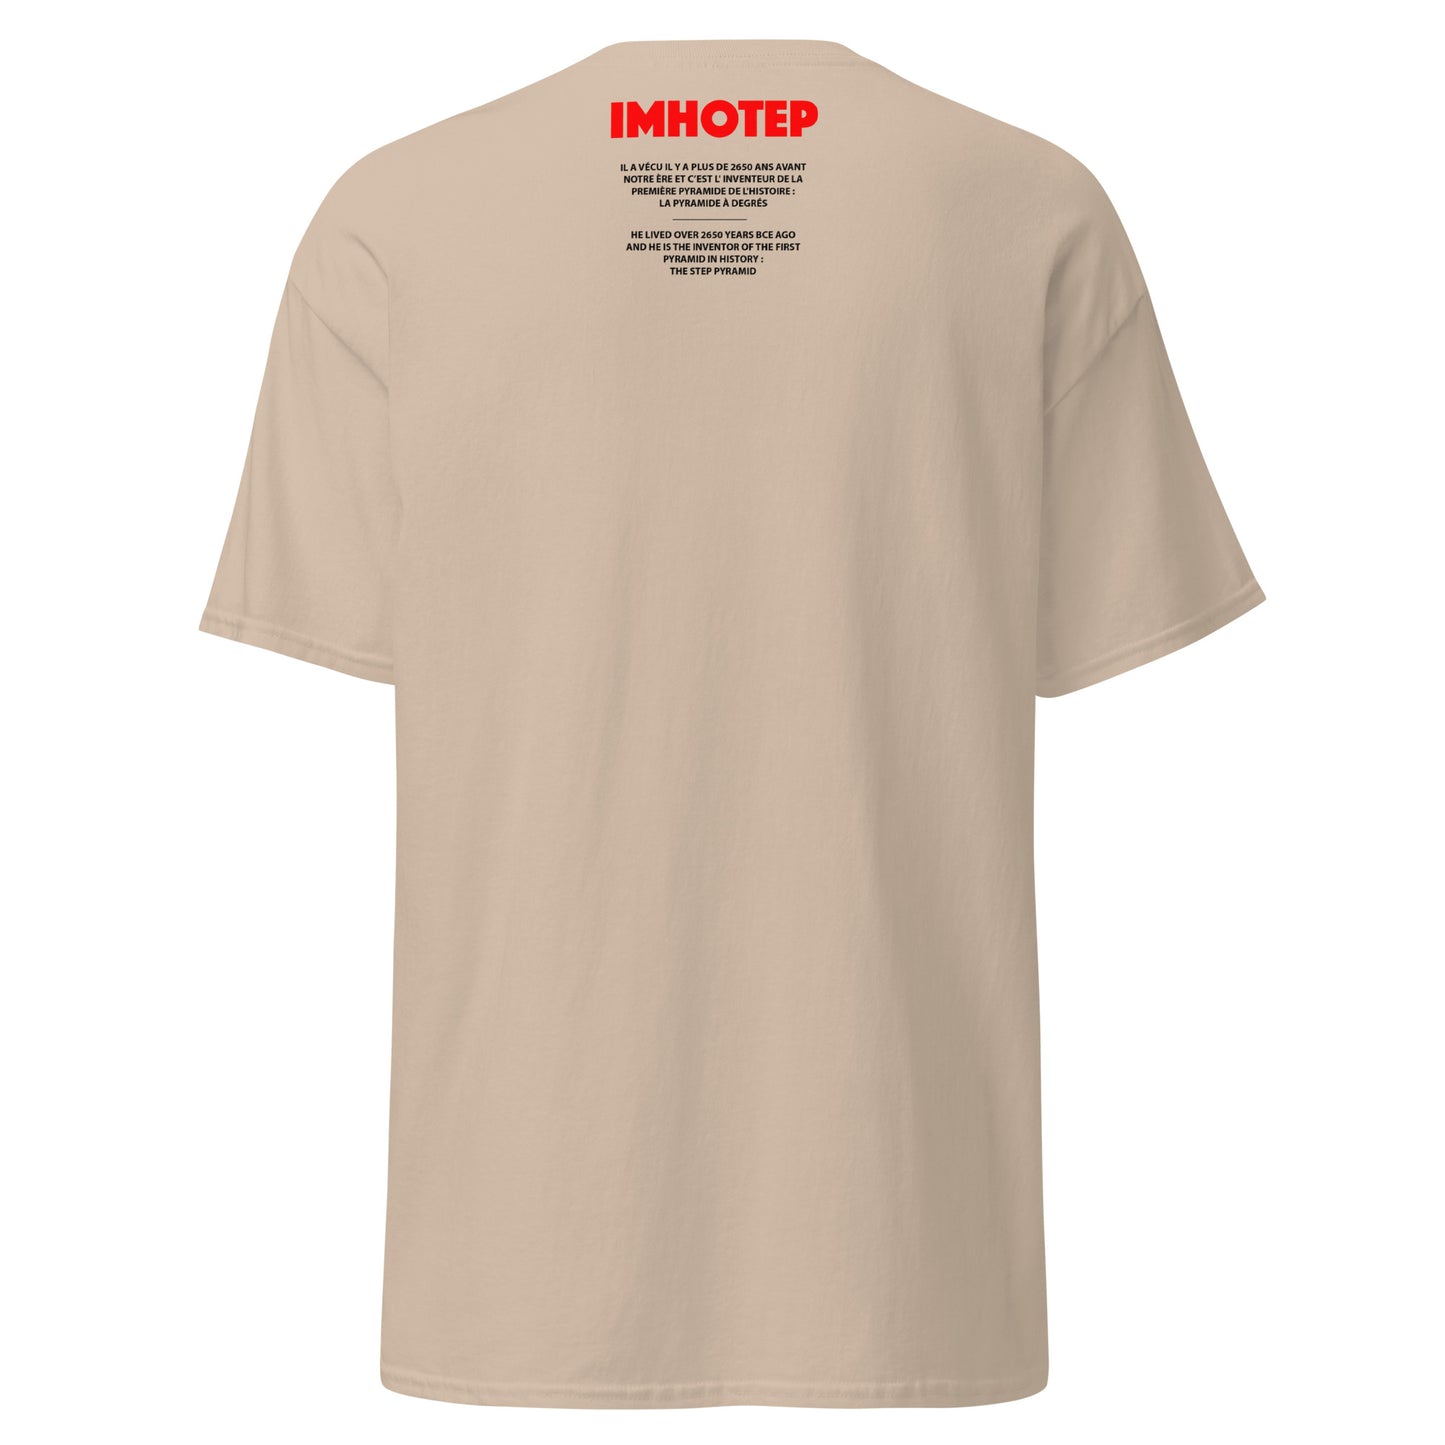 IMHOTEP (T-Shirt Cadre)